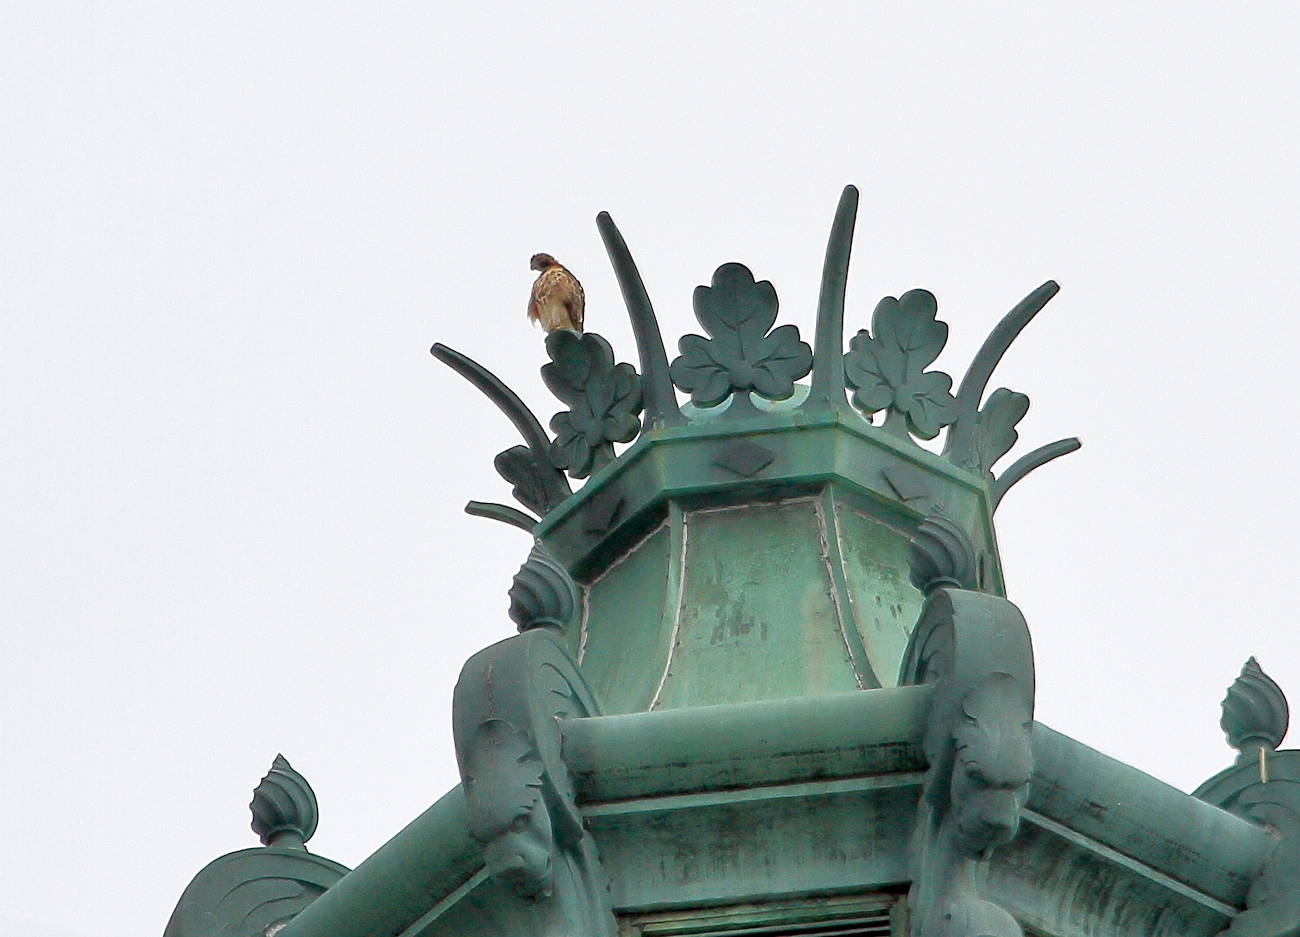 Sadie Red-tailed Hawk sitting on Con Edison tower